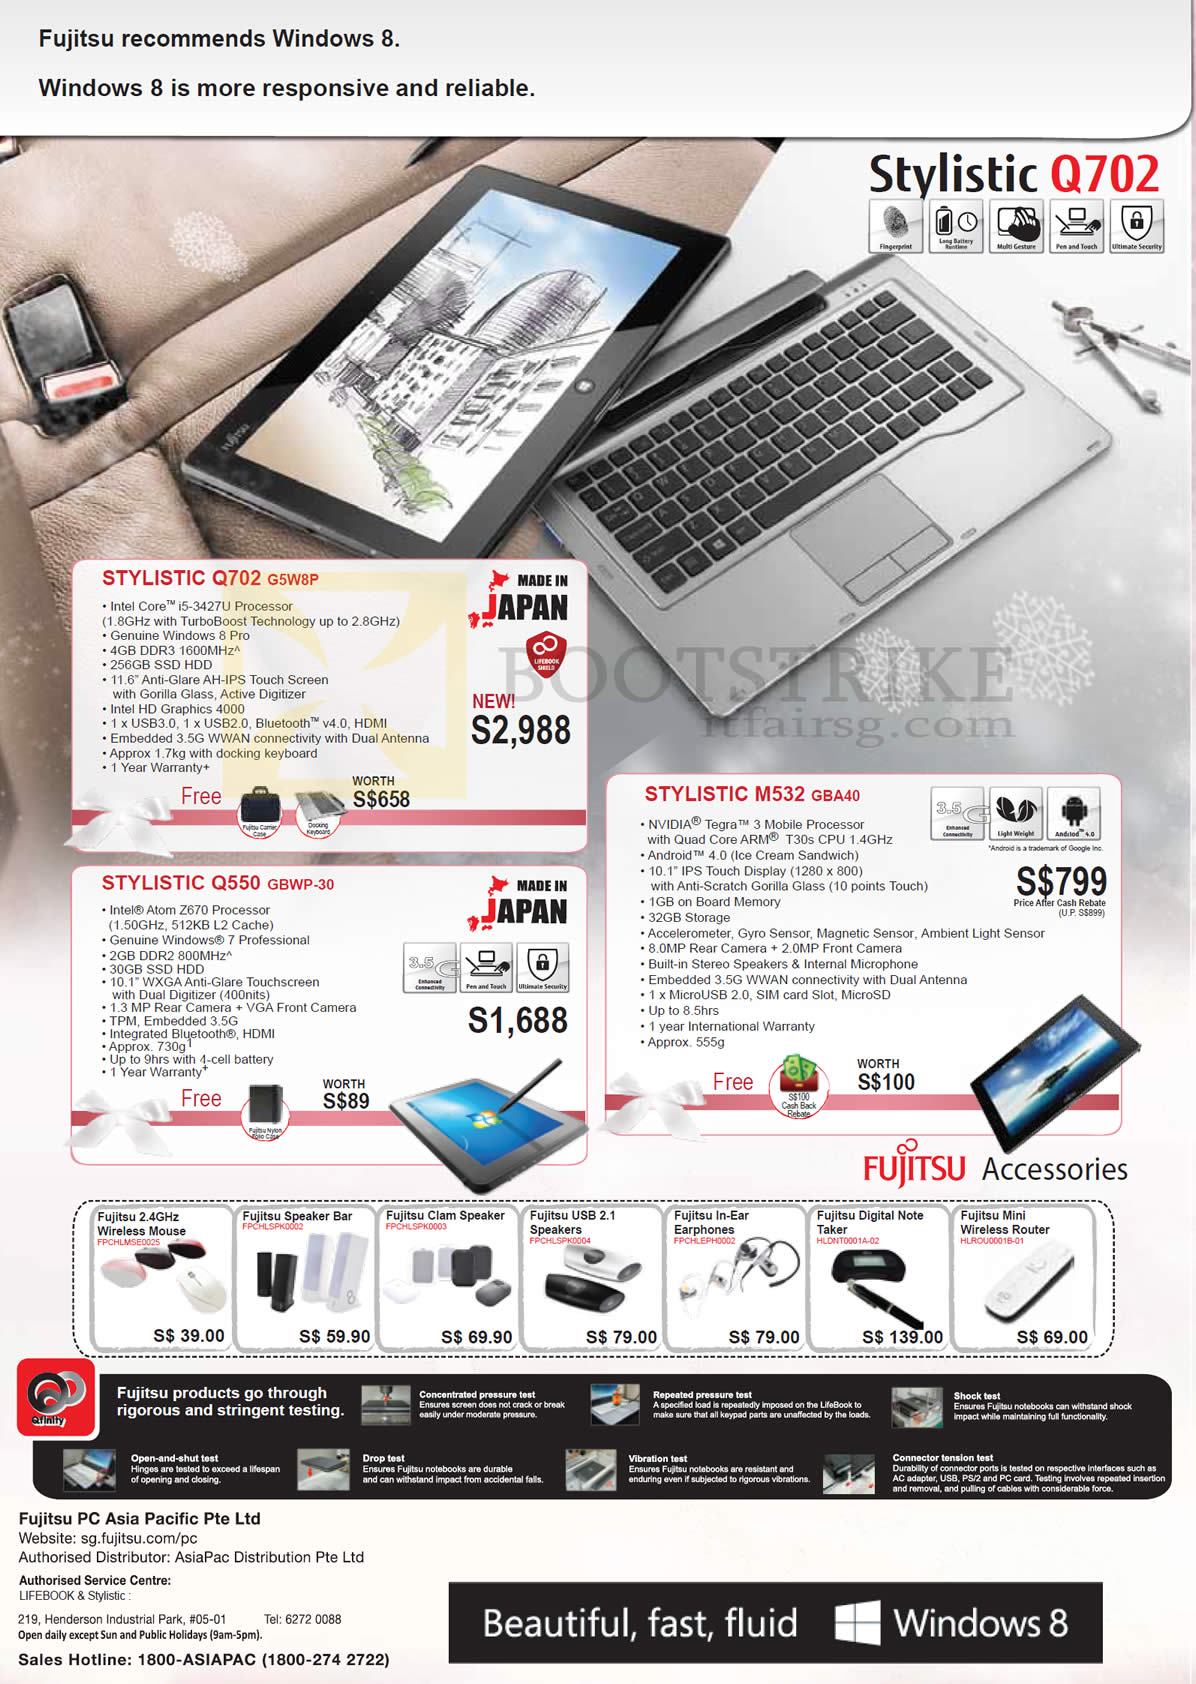 SITEX 2012 price list image brochure of Asiapac Fujitsu Tablets Stylistic Q702 G5W8P, Q550 GBWP-30, M532 GBA40, Accessories Mouse, Sepaker, Earphones, Router